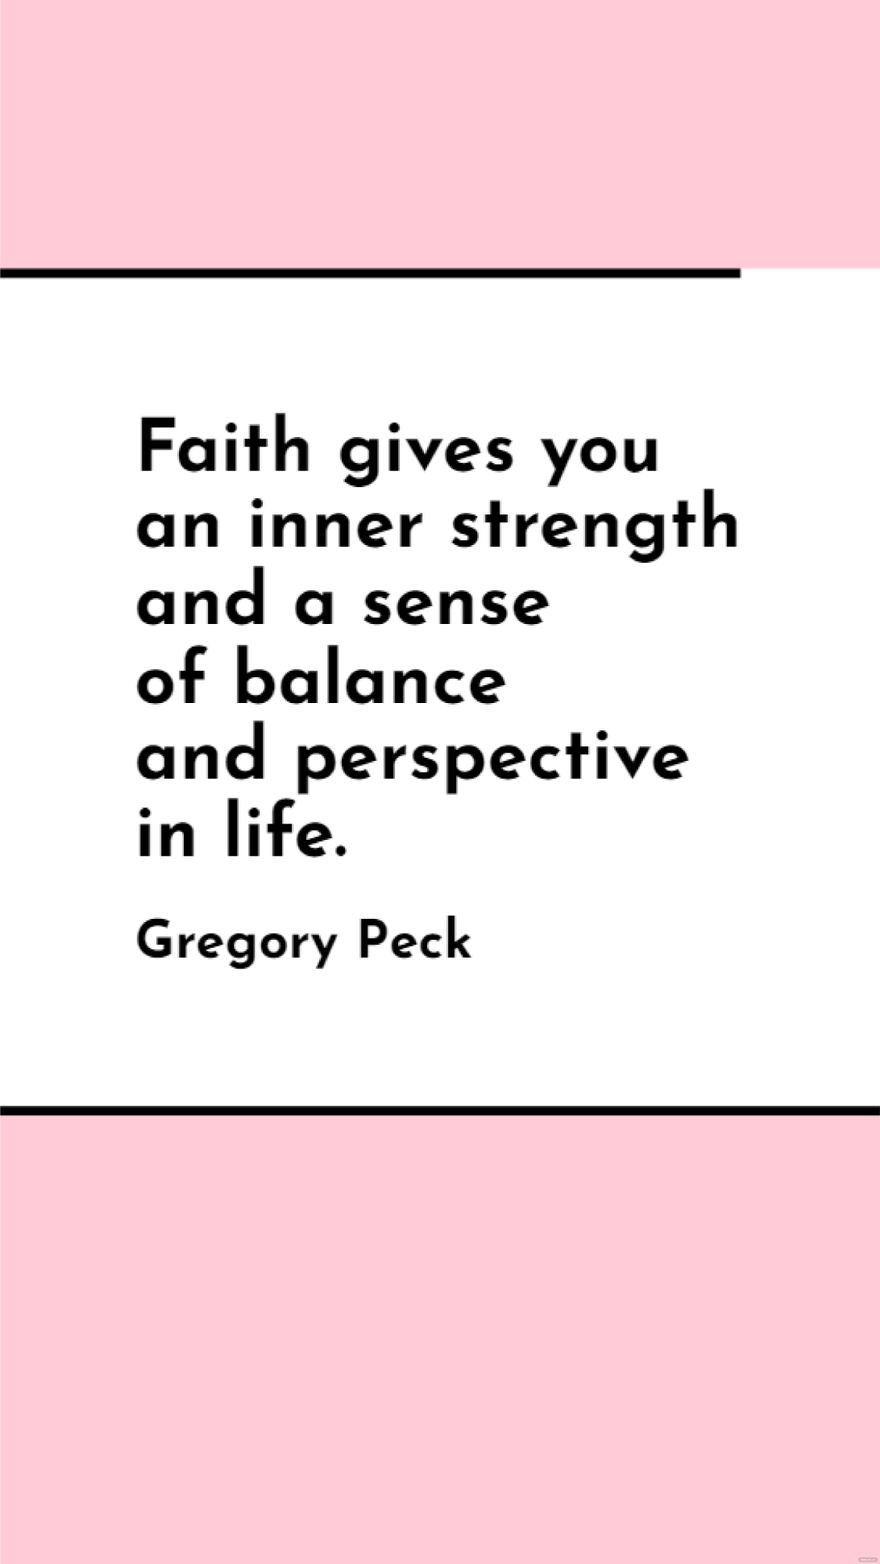 Gregory Peck - Faith gives you an inner strength and a sense of balance and perspective in life.